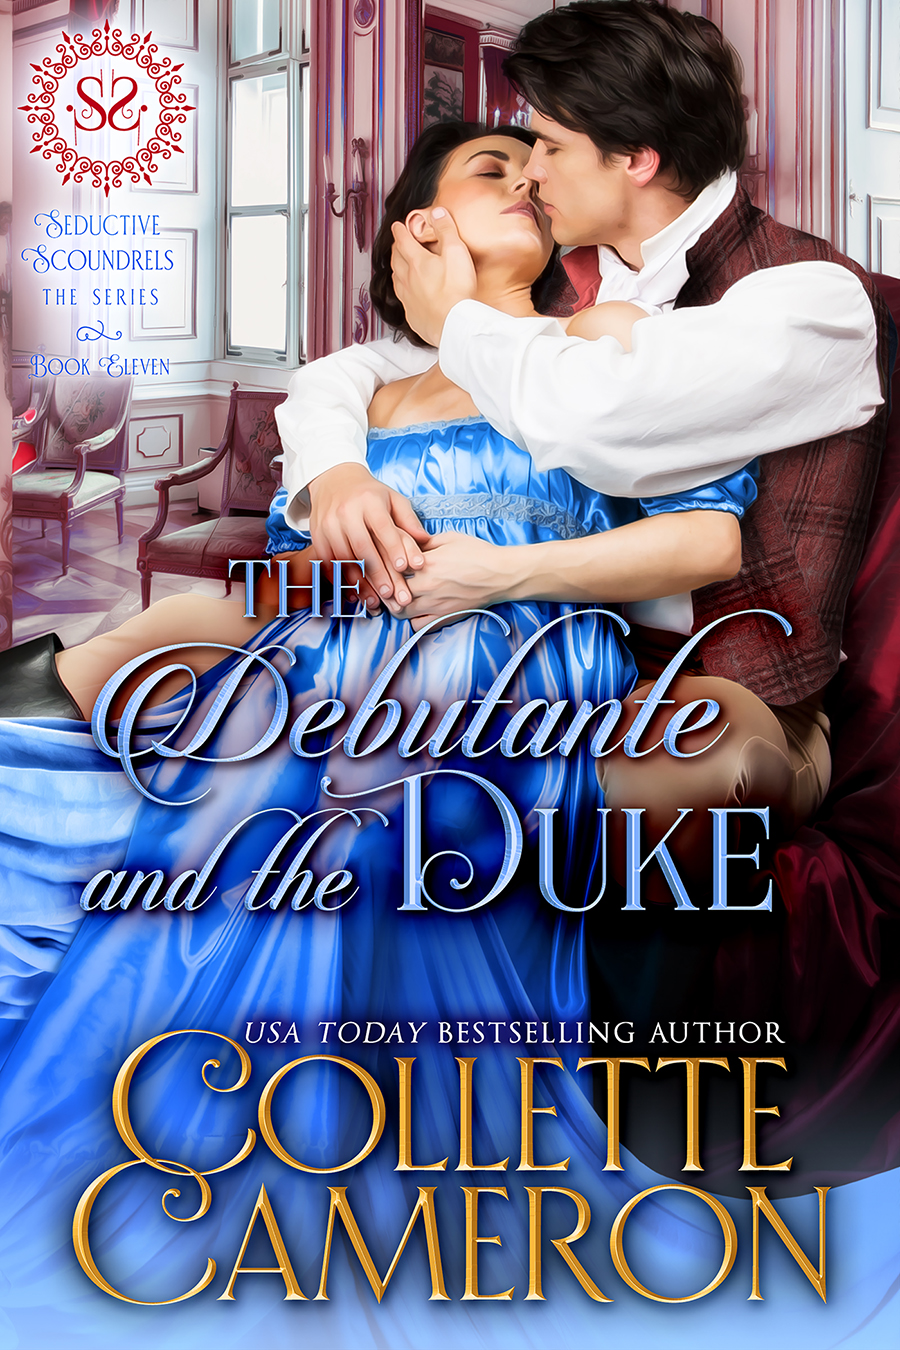 THE DEBUTANTE AND THE DUKE is here! 1